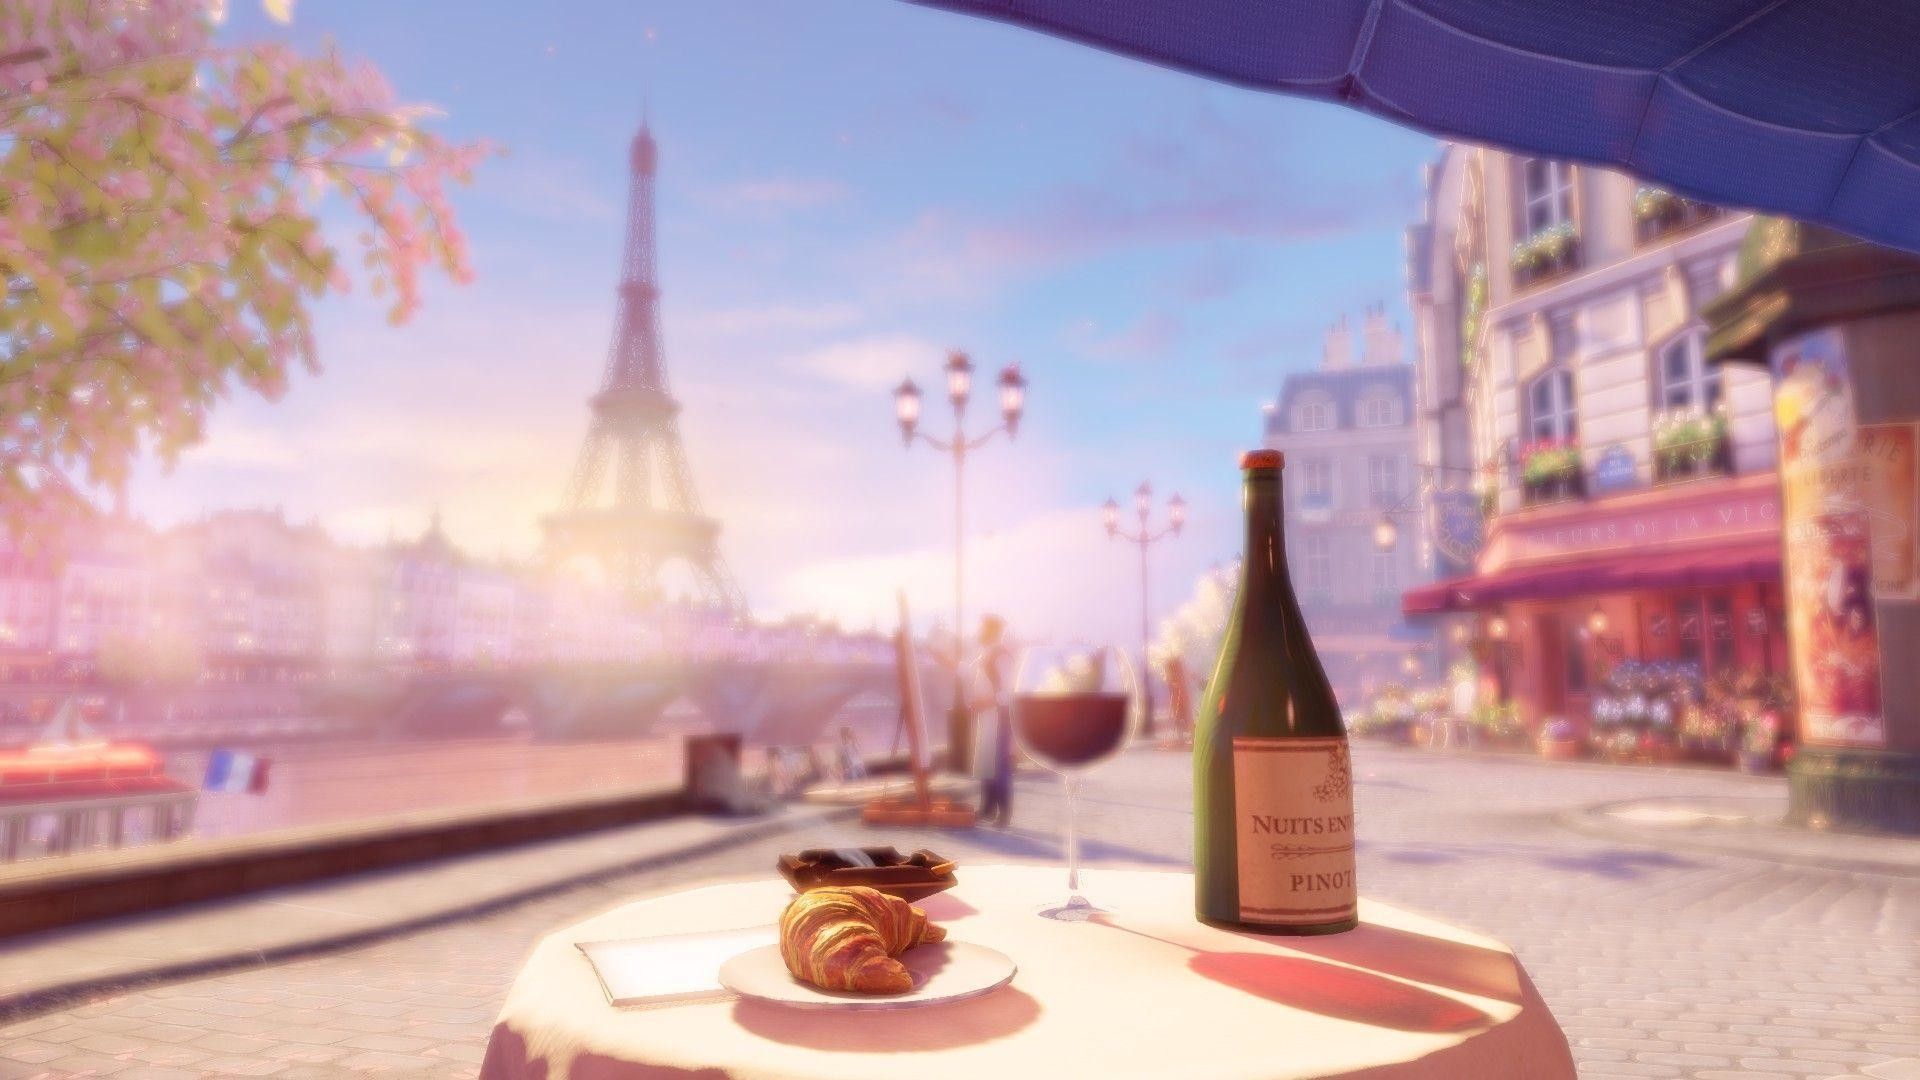 A bottle of wine and a pastry sit on a table in front of the Eiffel Tower. - Paris